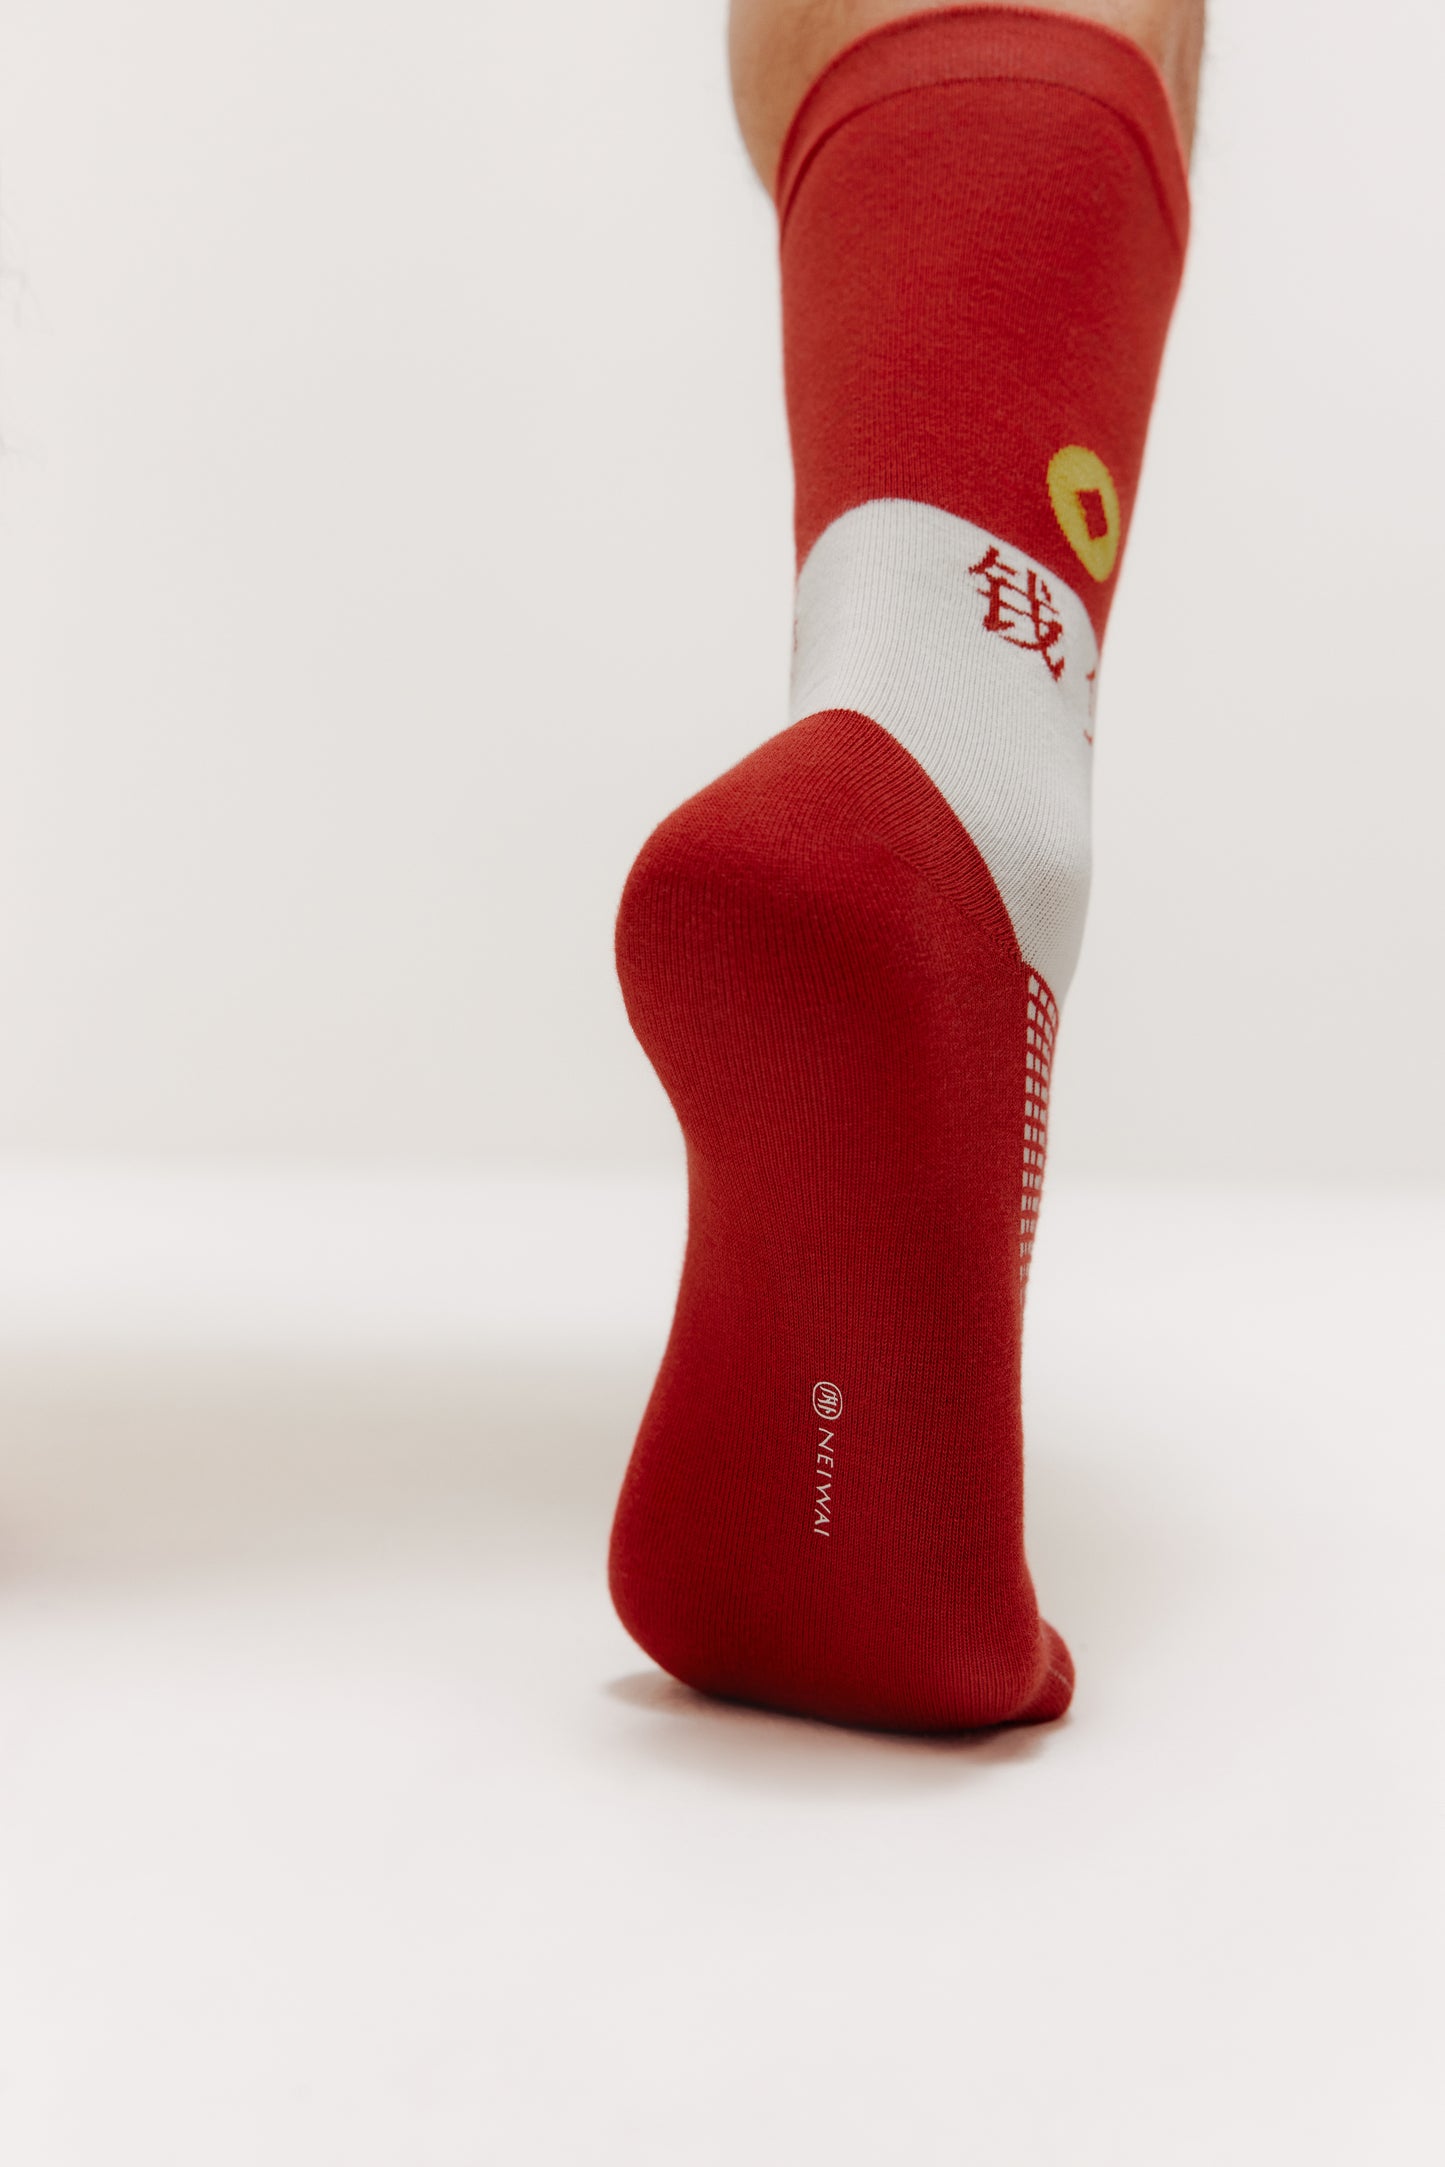 man's right foot waring red sock